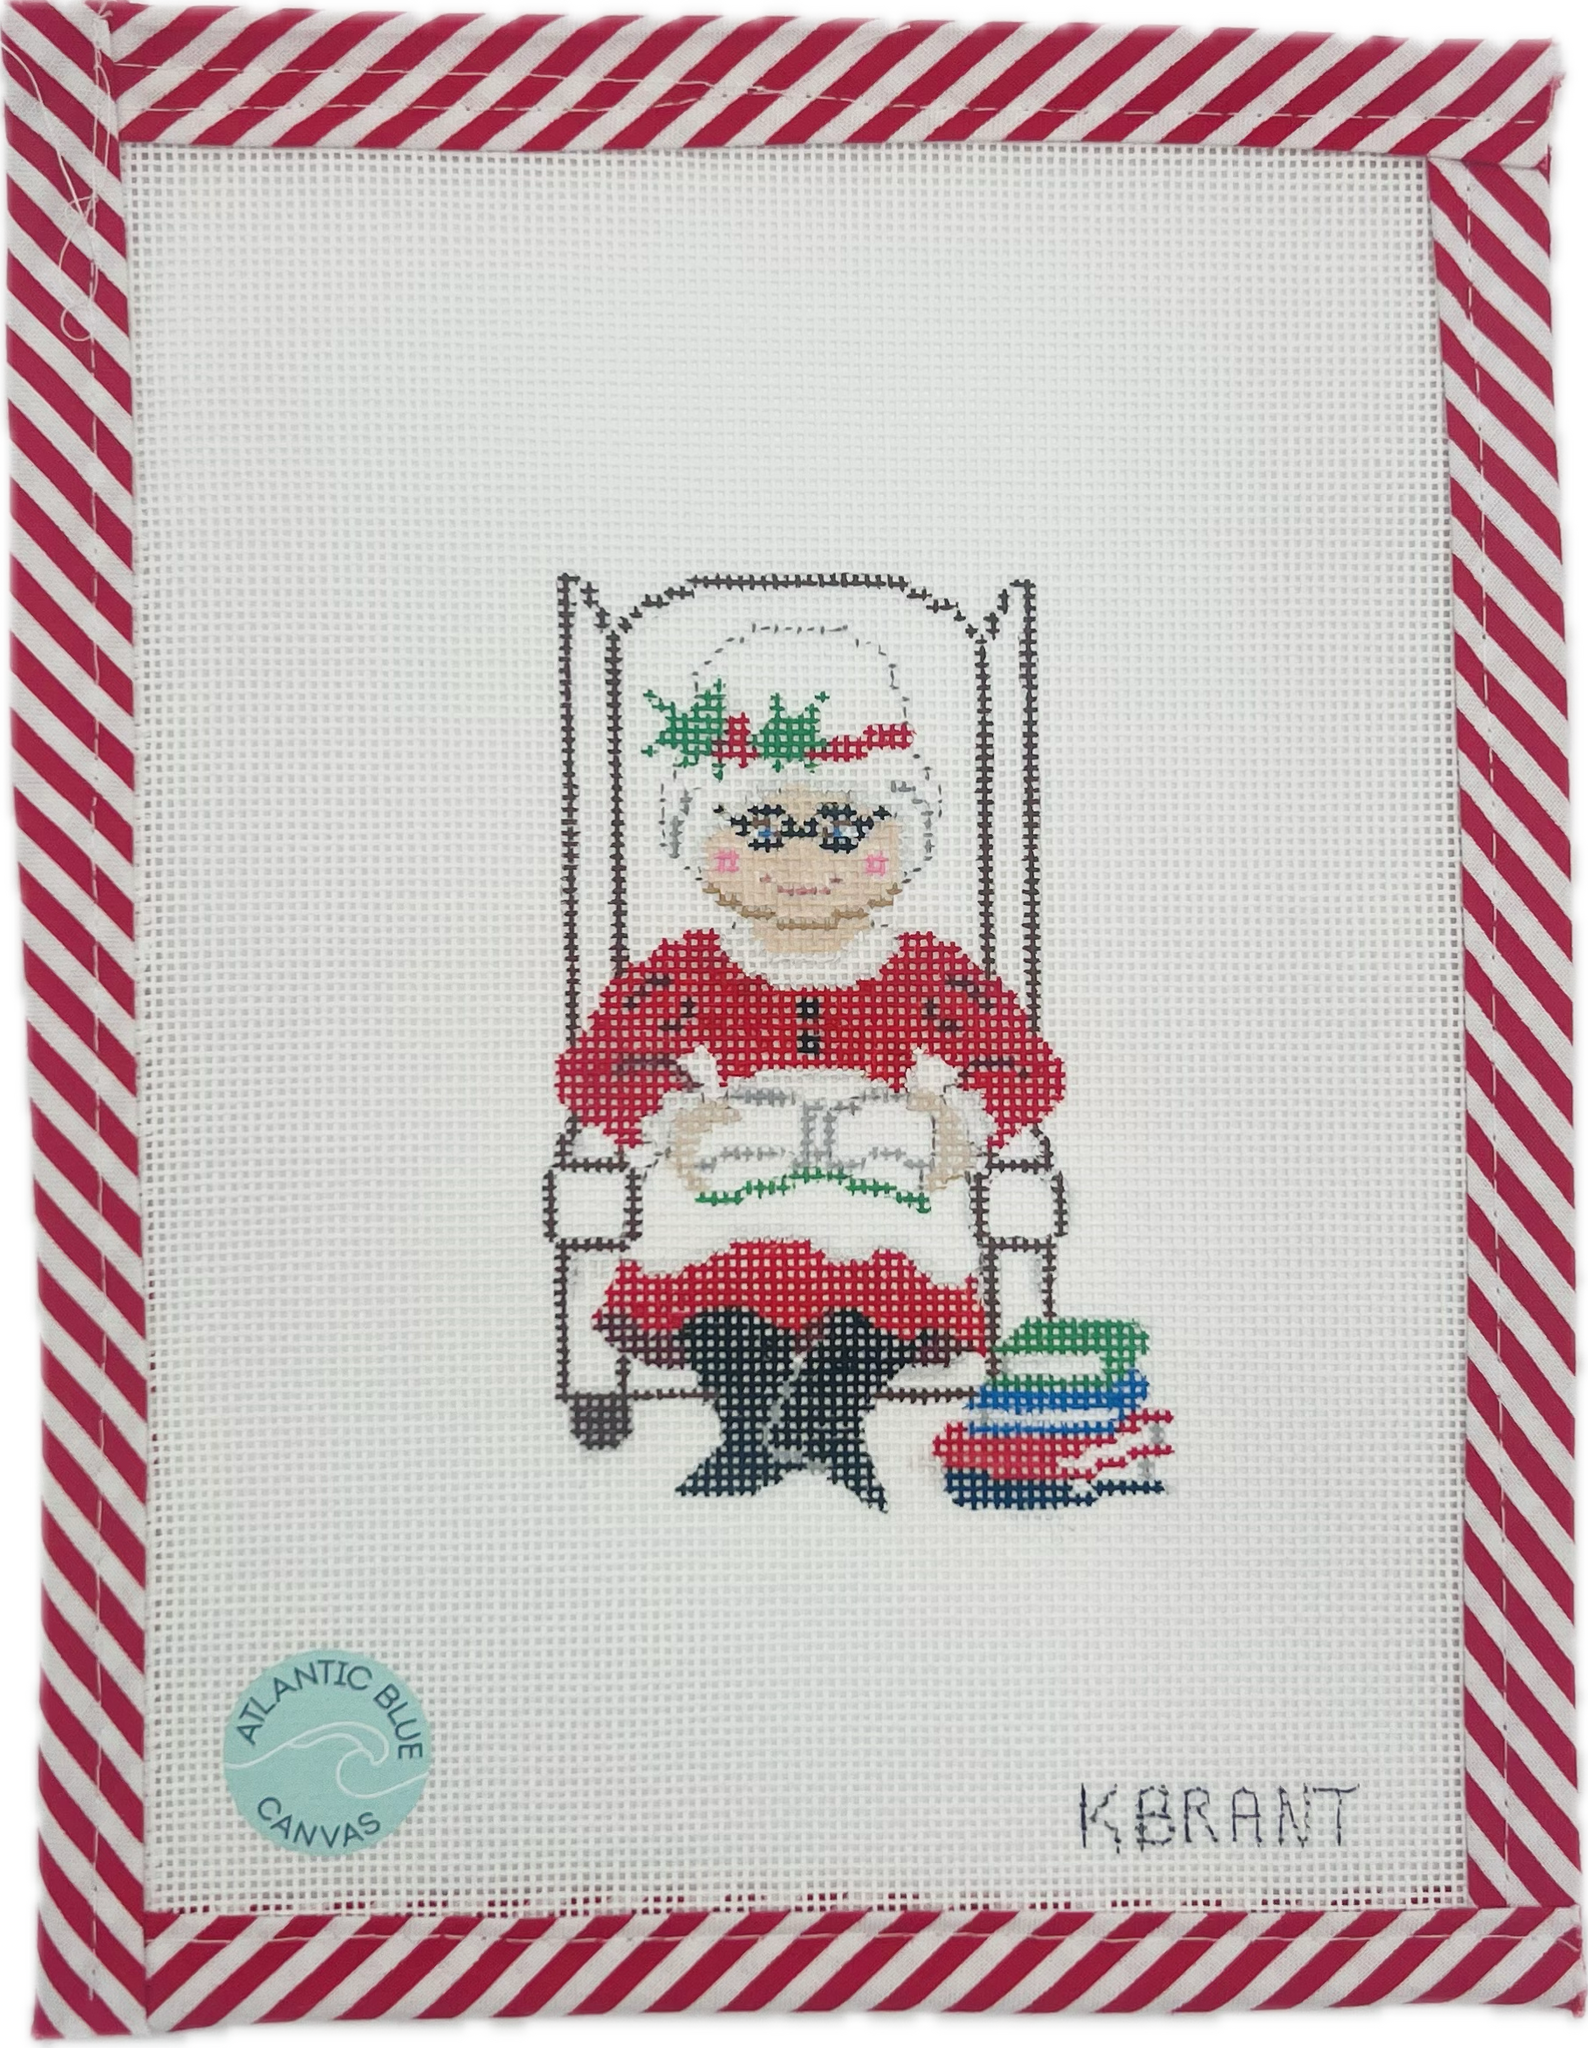 Mrs. Claus Reading